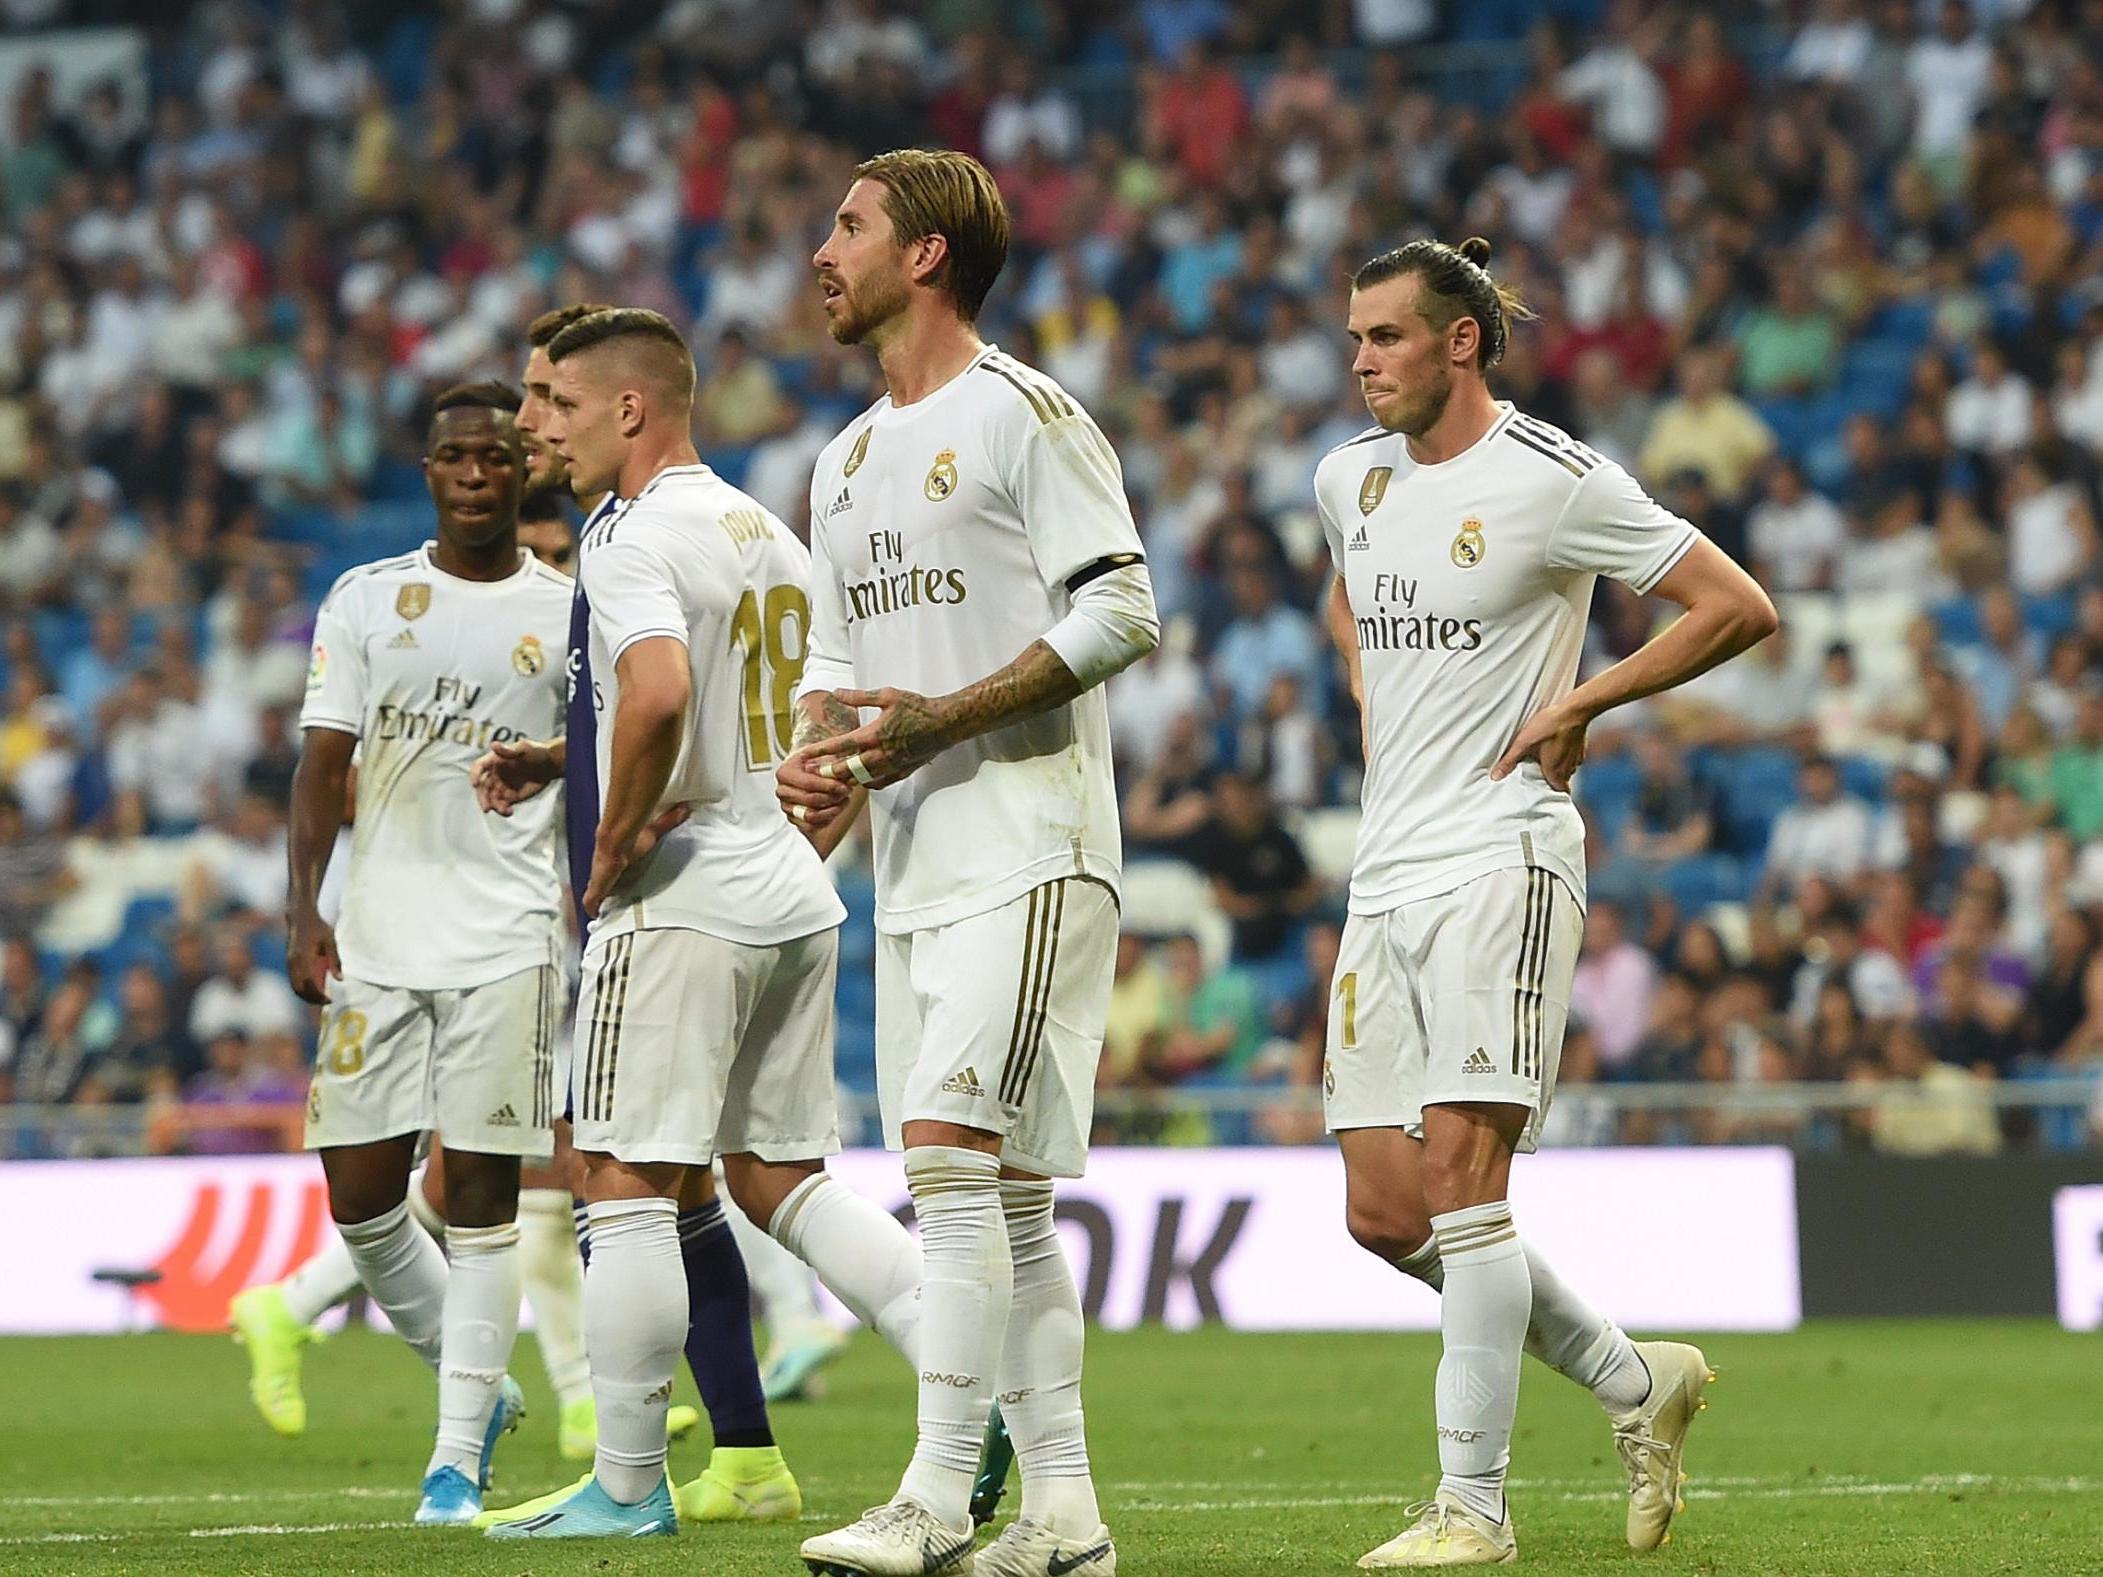 Real Madrid appear dejected after conceding an equaliser vs Valladolid